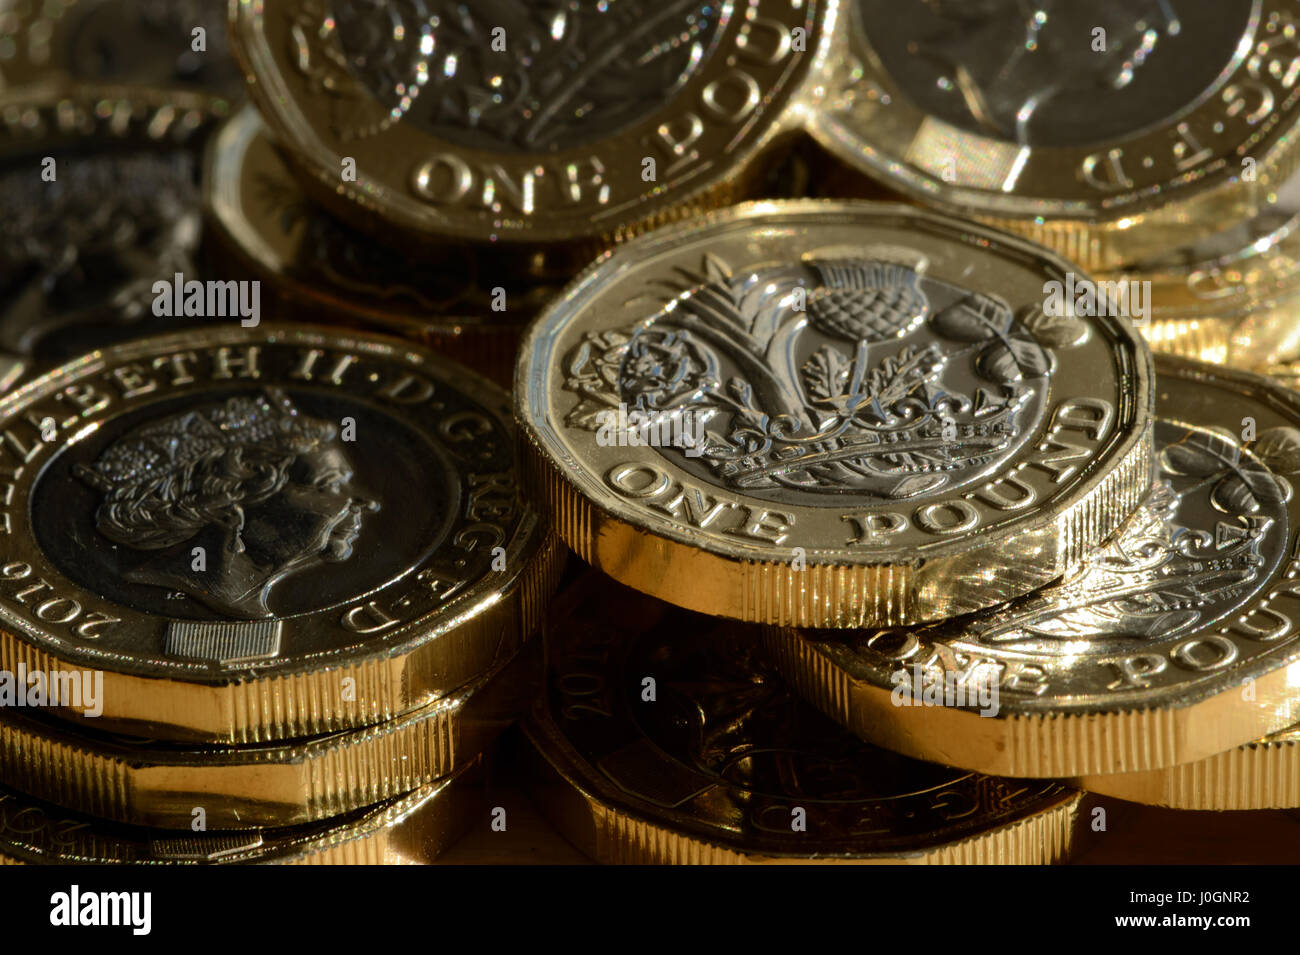 New £1 coin is 12 sided and is the most secure coin in the world - British new £1 coin is bimetallic with latent image that changes from £ symbol - 1h Stock Photo